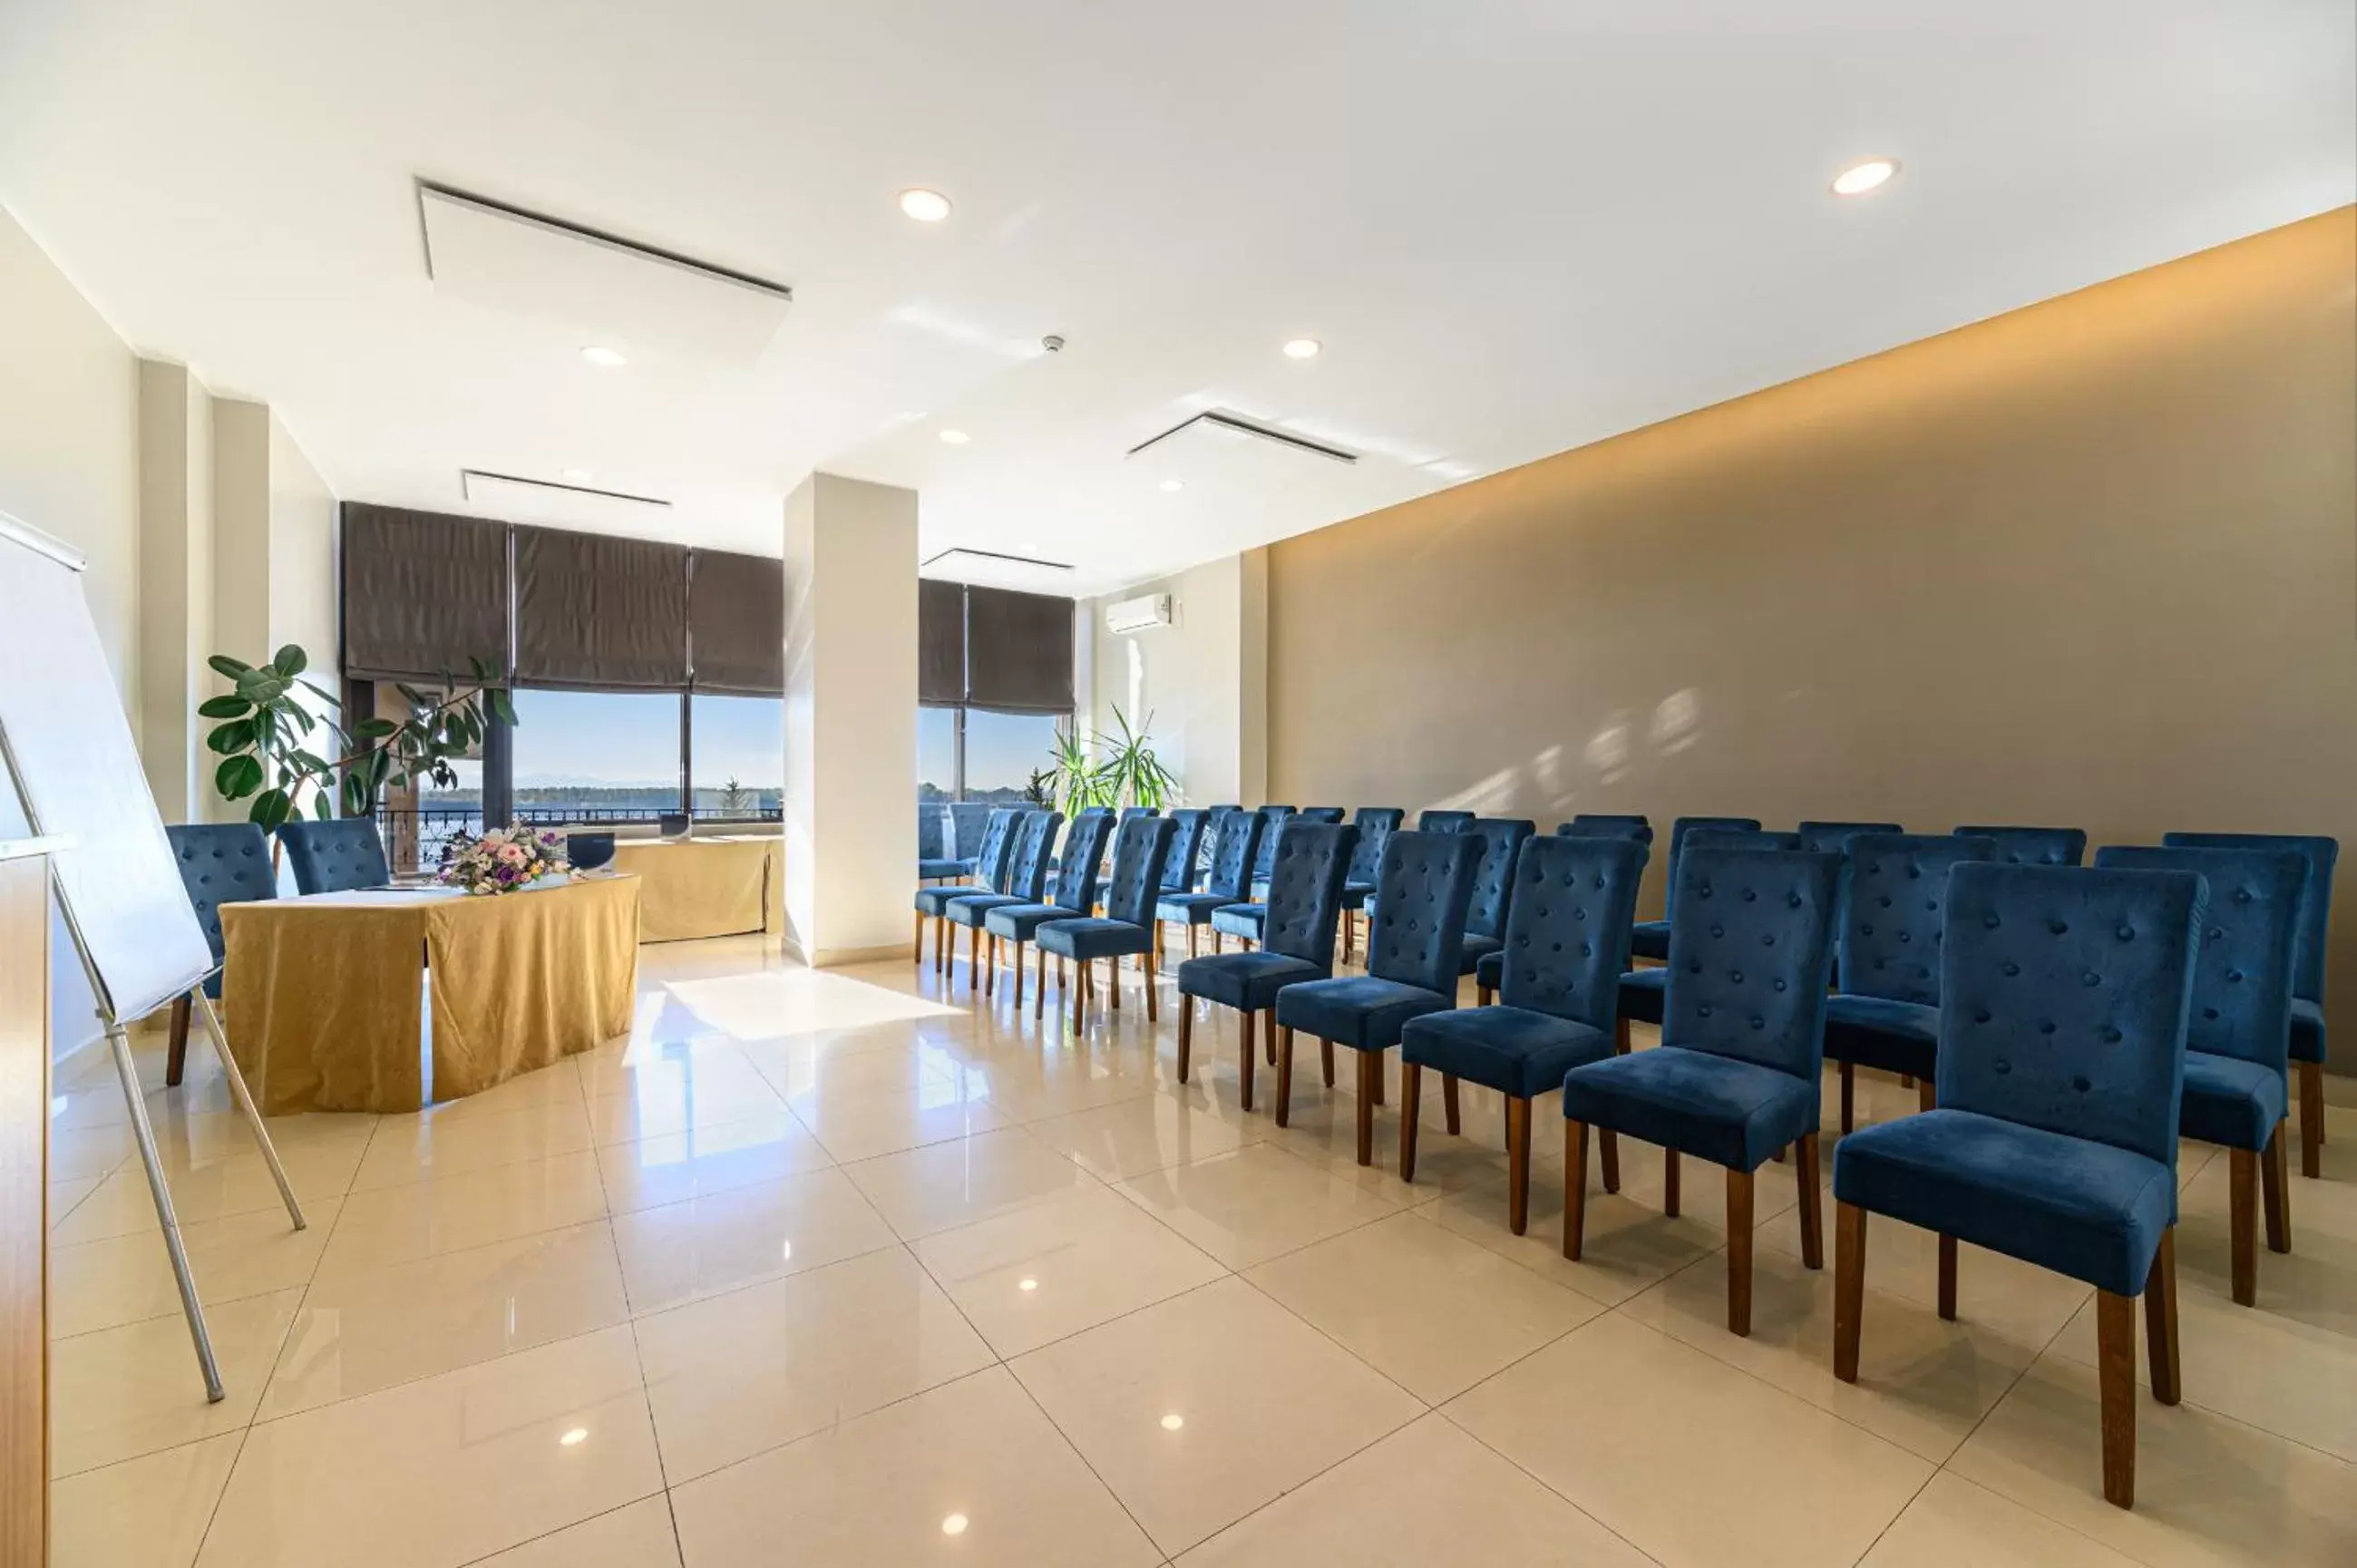 Business facilities in Faleza Hotel by Vega